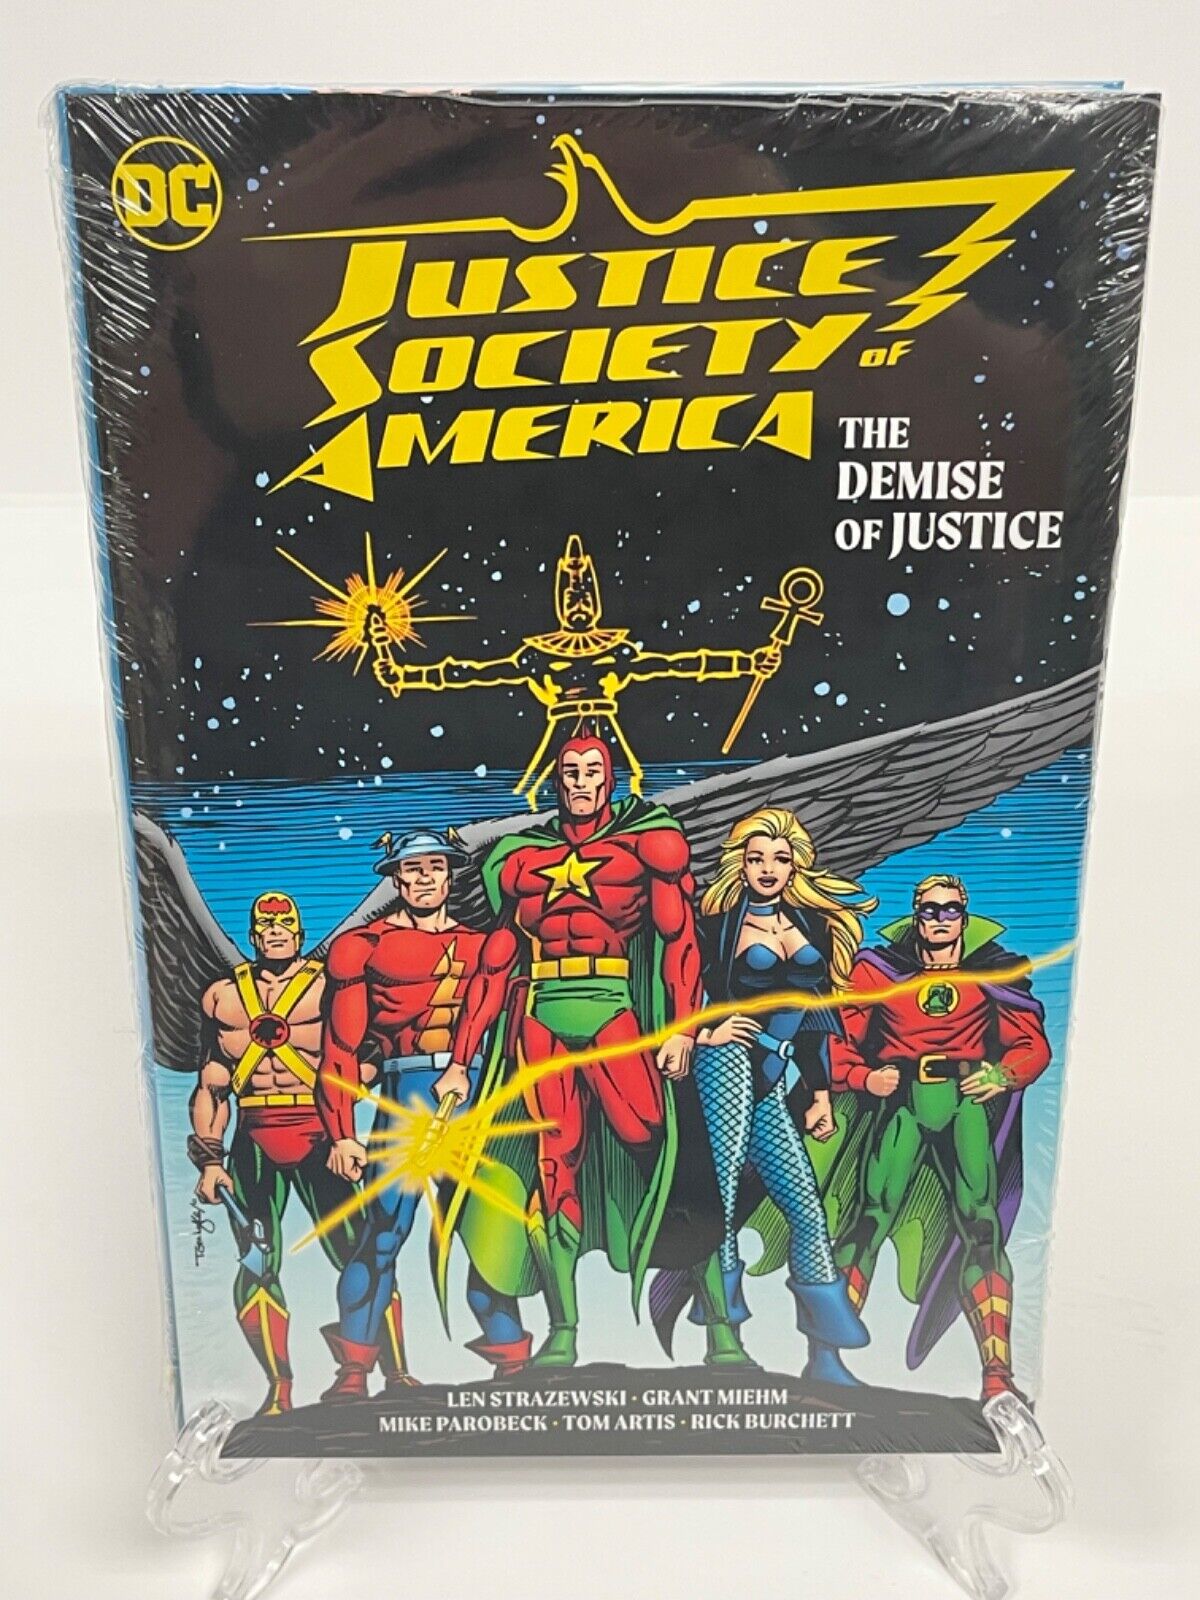 Justice Society of America The Demise of Justice New DC Comics HC Sealed